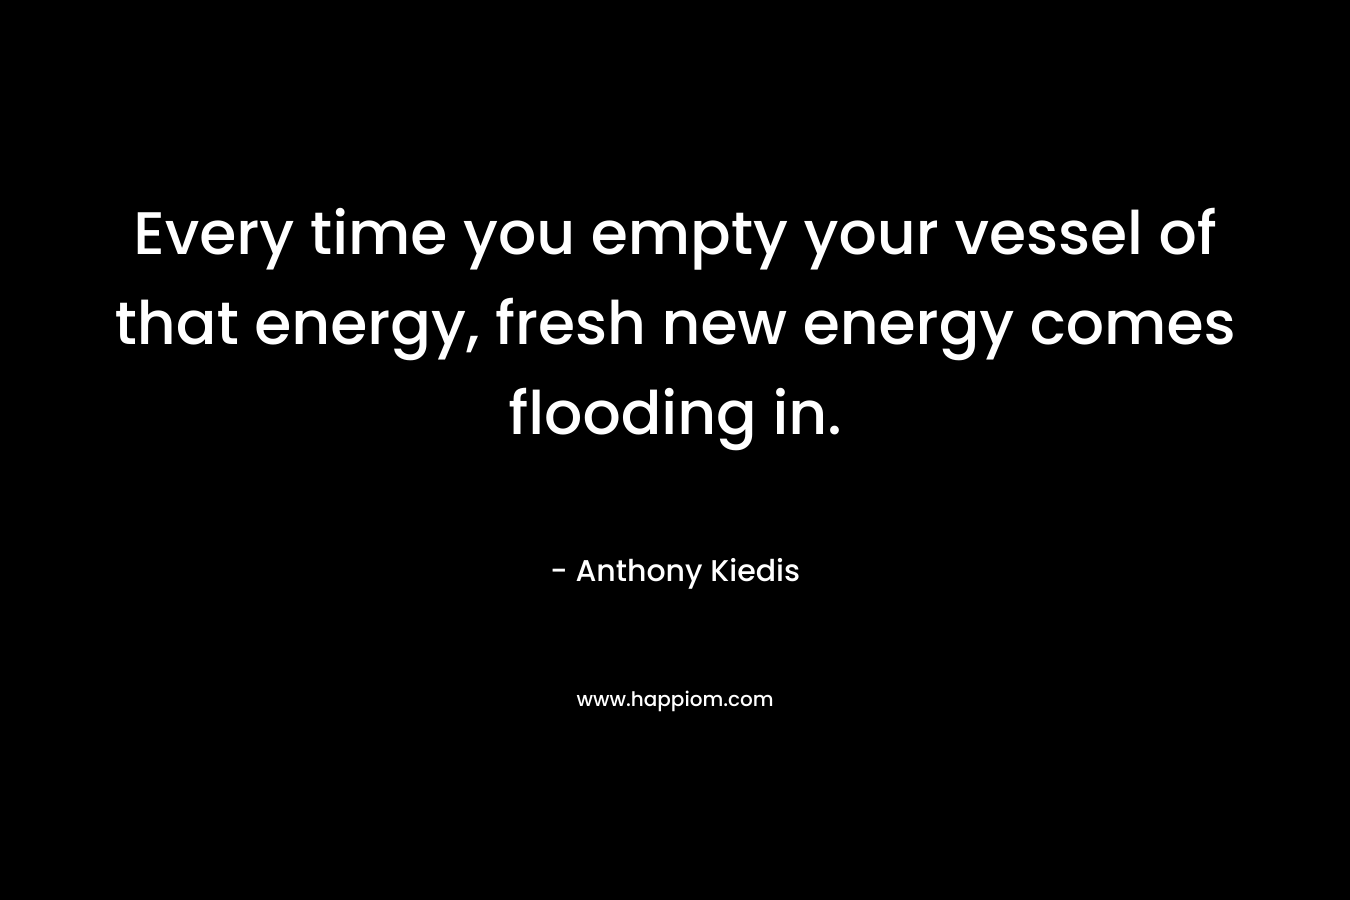 Every time you empty your vessel of that energy, fresh new energy comes flooding in.